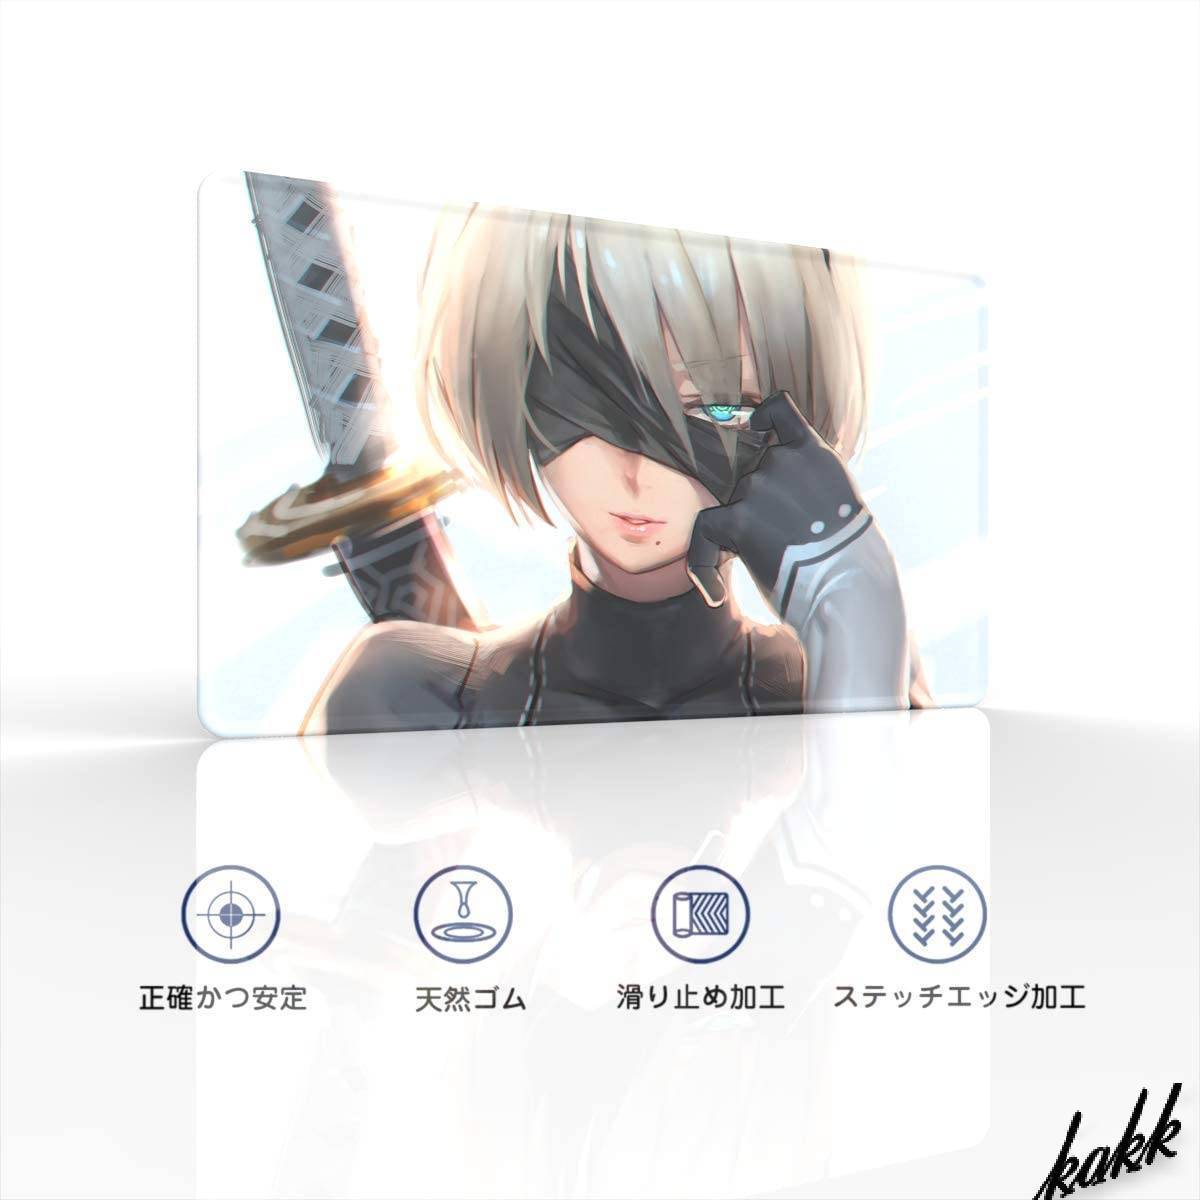 Nier Automata 大型マウスパッド キーボードパッド プレイマット ニーアオートマタ ゲーム アニメ グッズ Product Details Yahoo Auctions Japan Proxy Bidding And Shopping Service From Japan